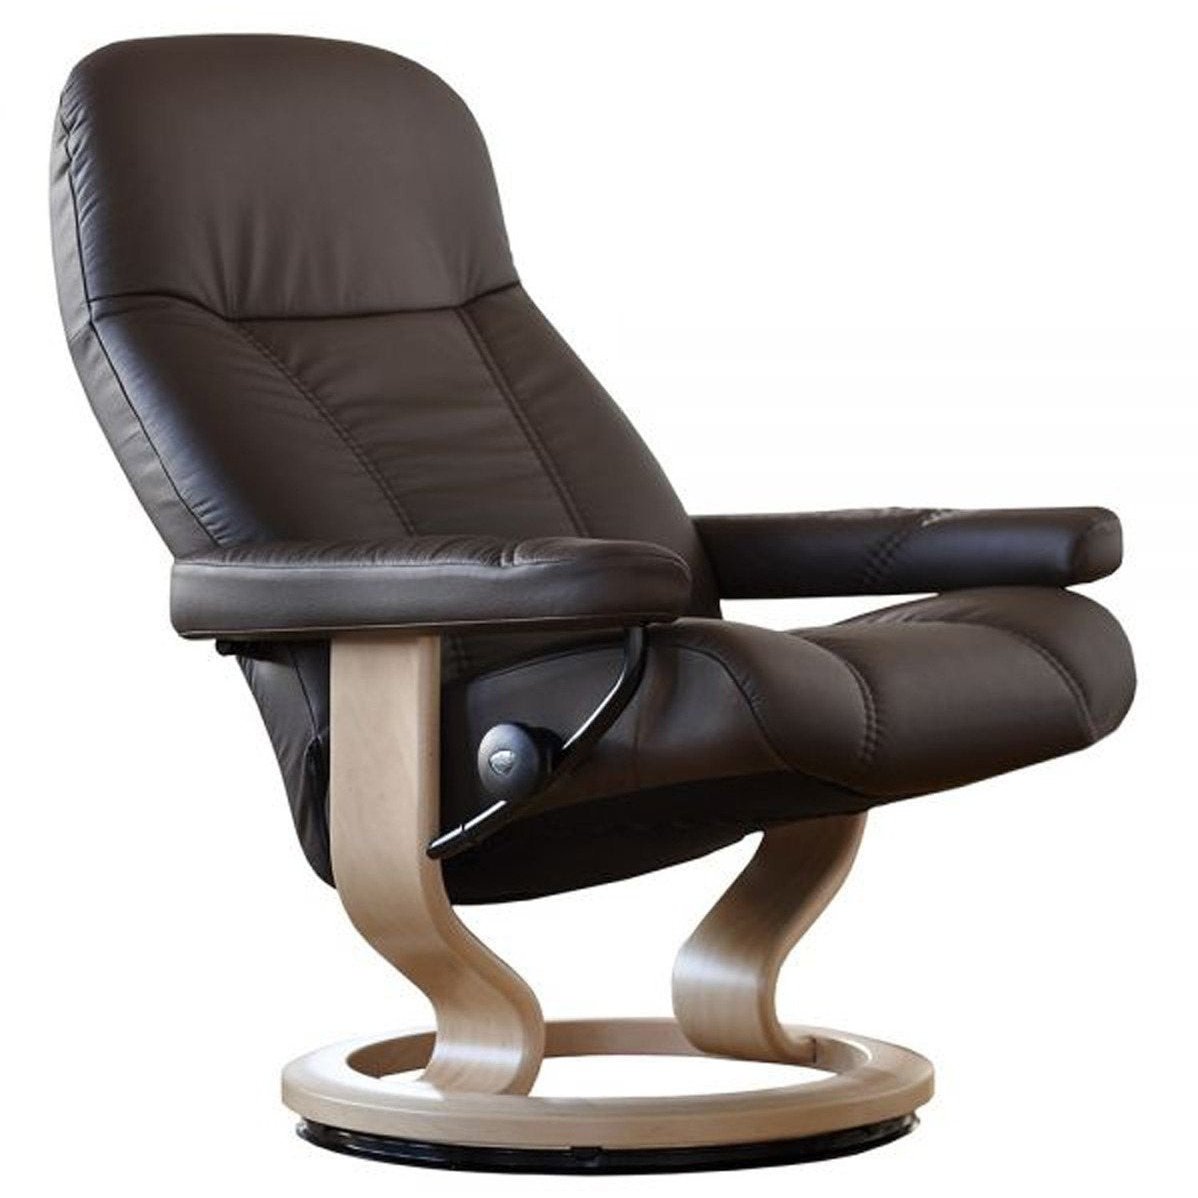 Stressless Consul Small Recliner Chair